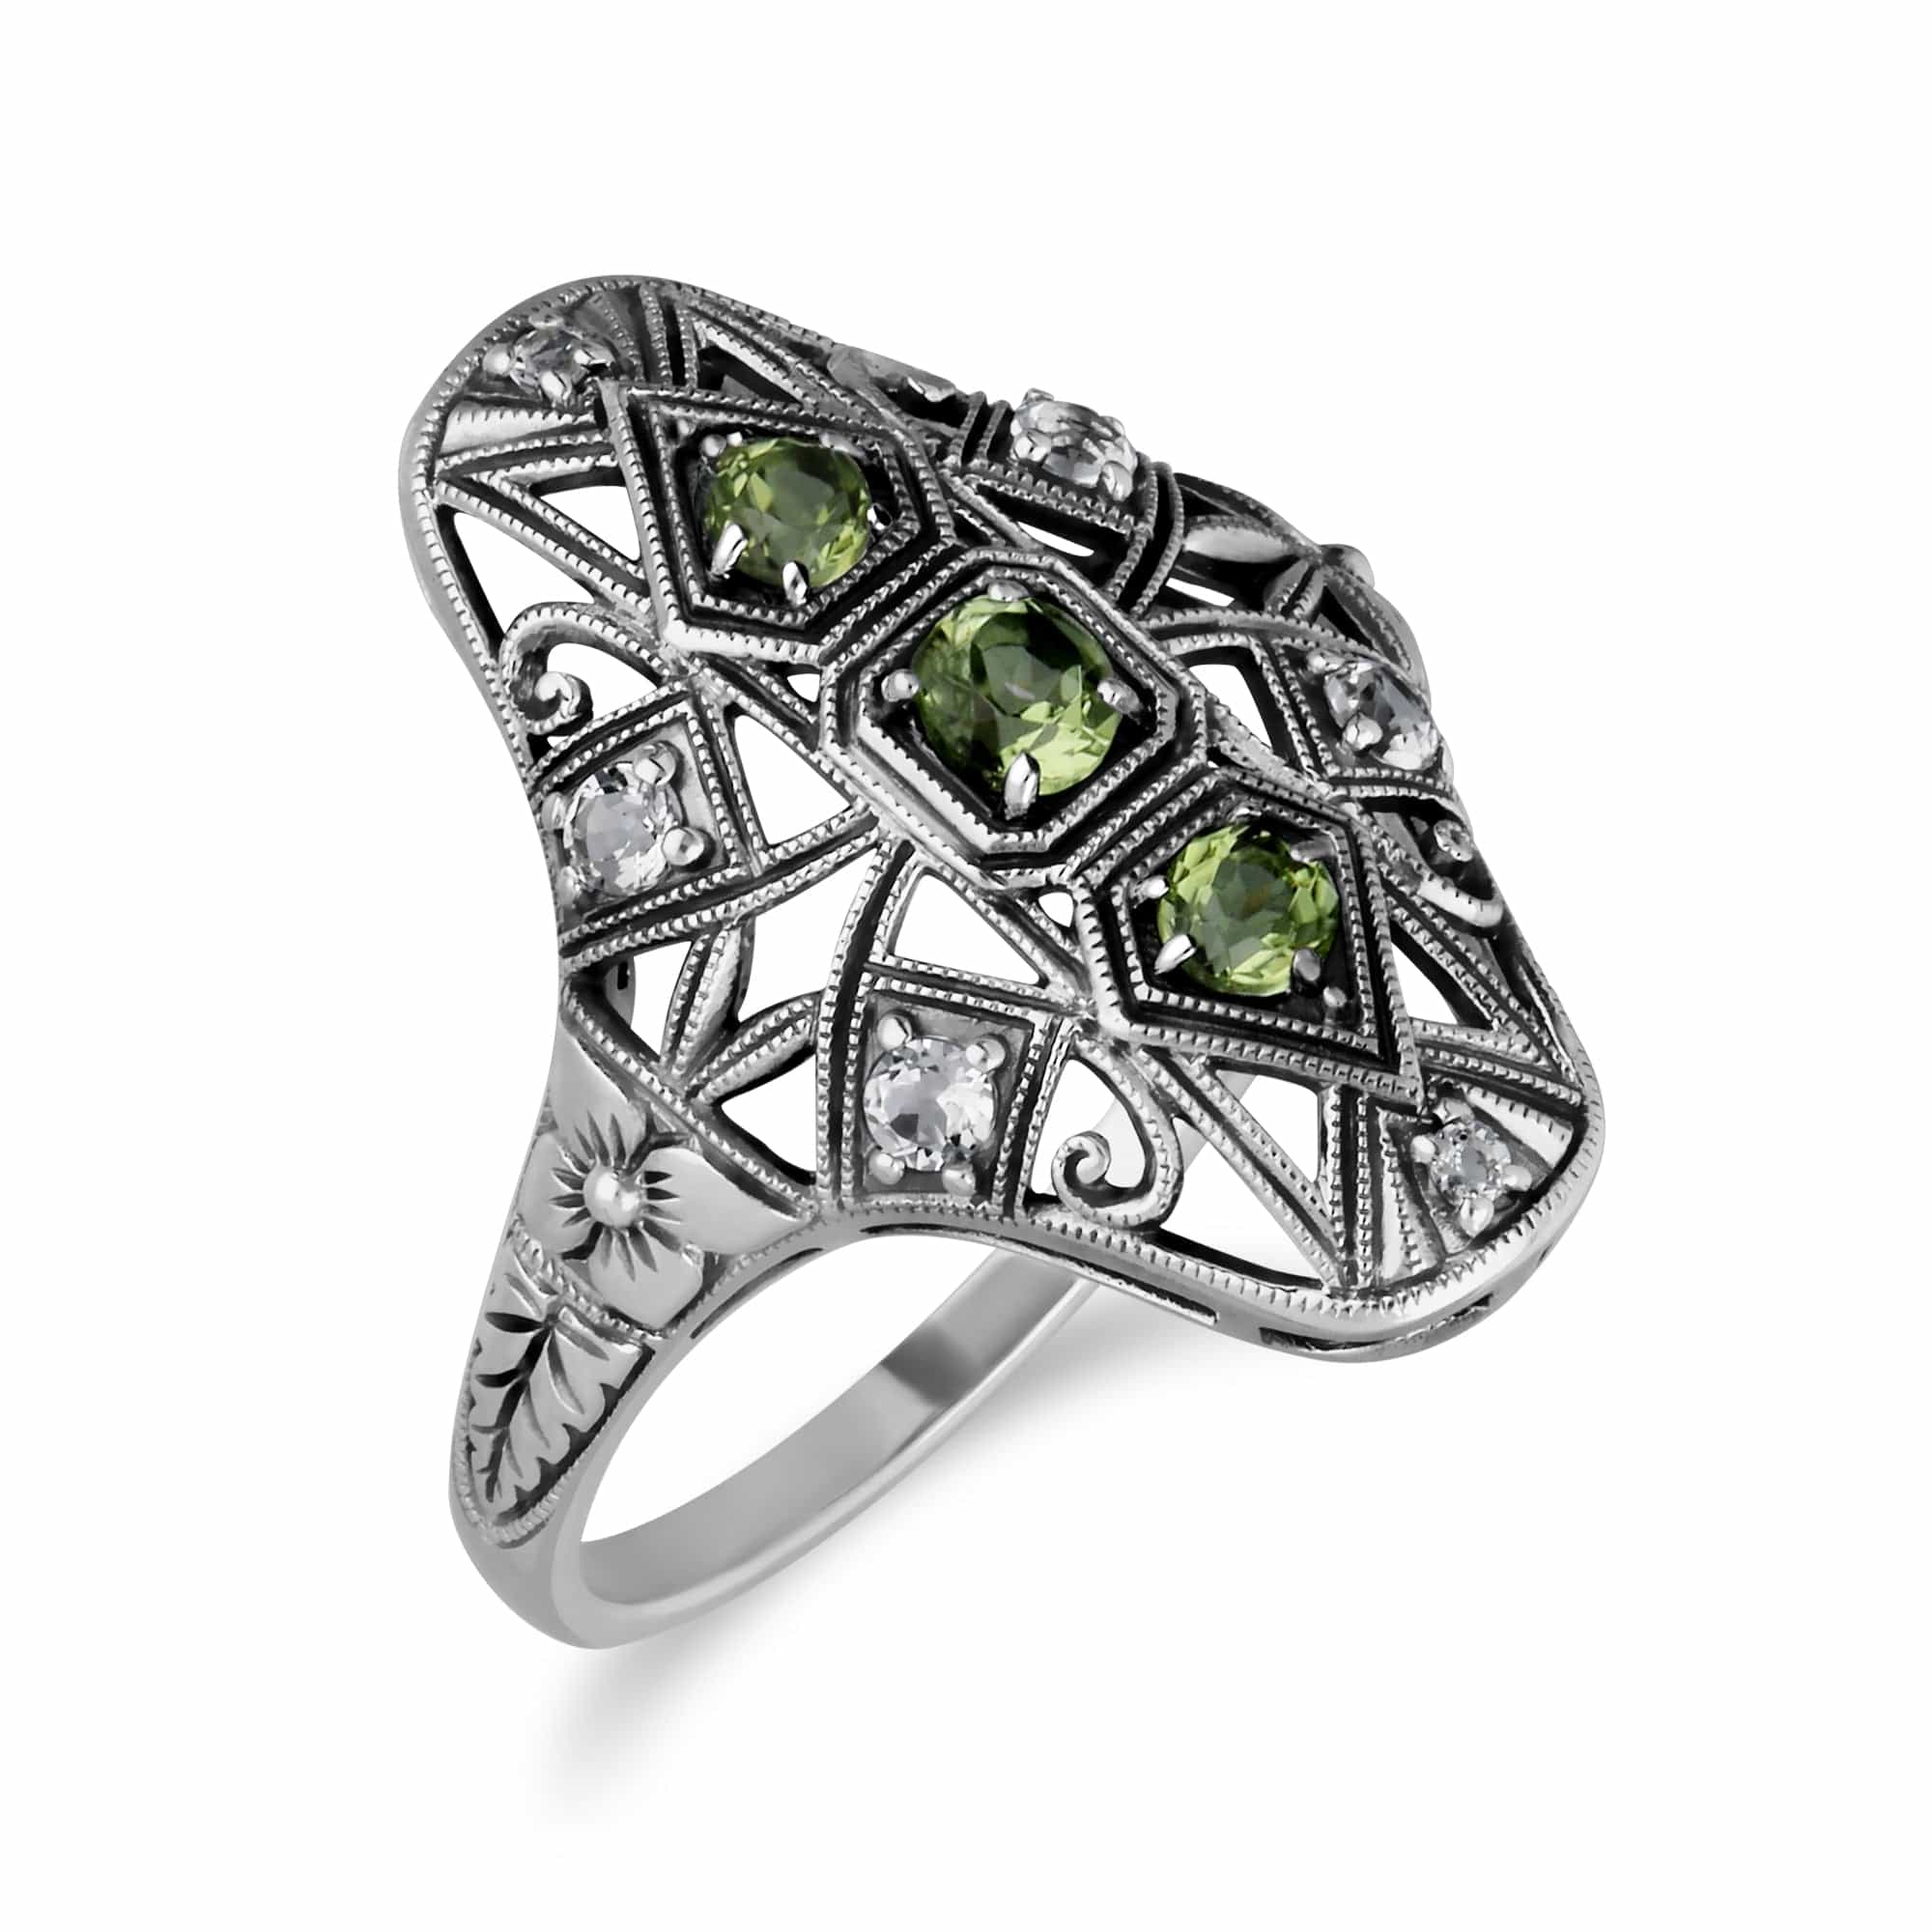 241R210604925 Art Nouveau Style Round Peridot & White Topaz Statement Ring in 925 Sterling Silver 2